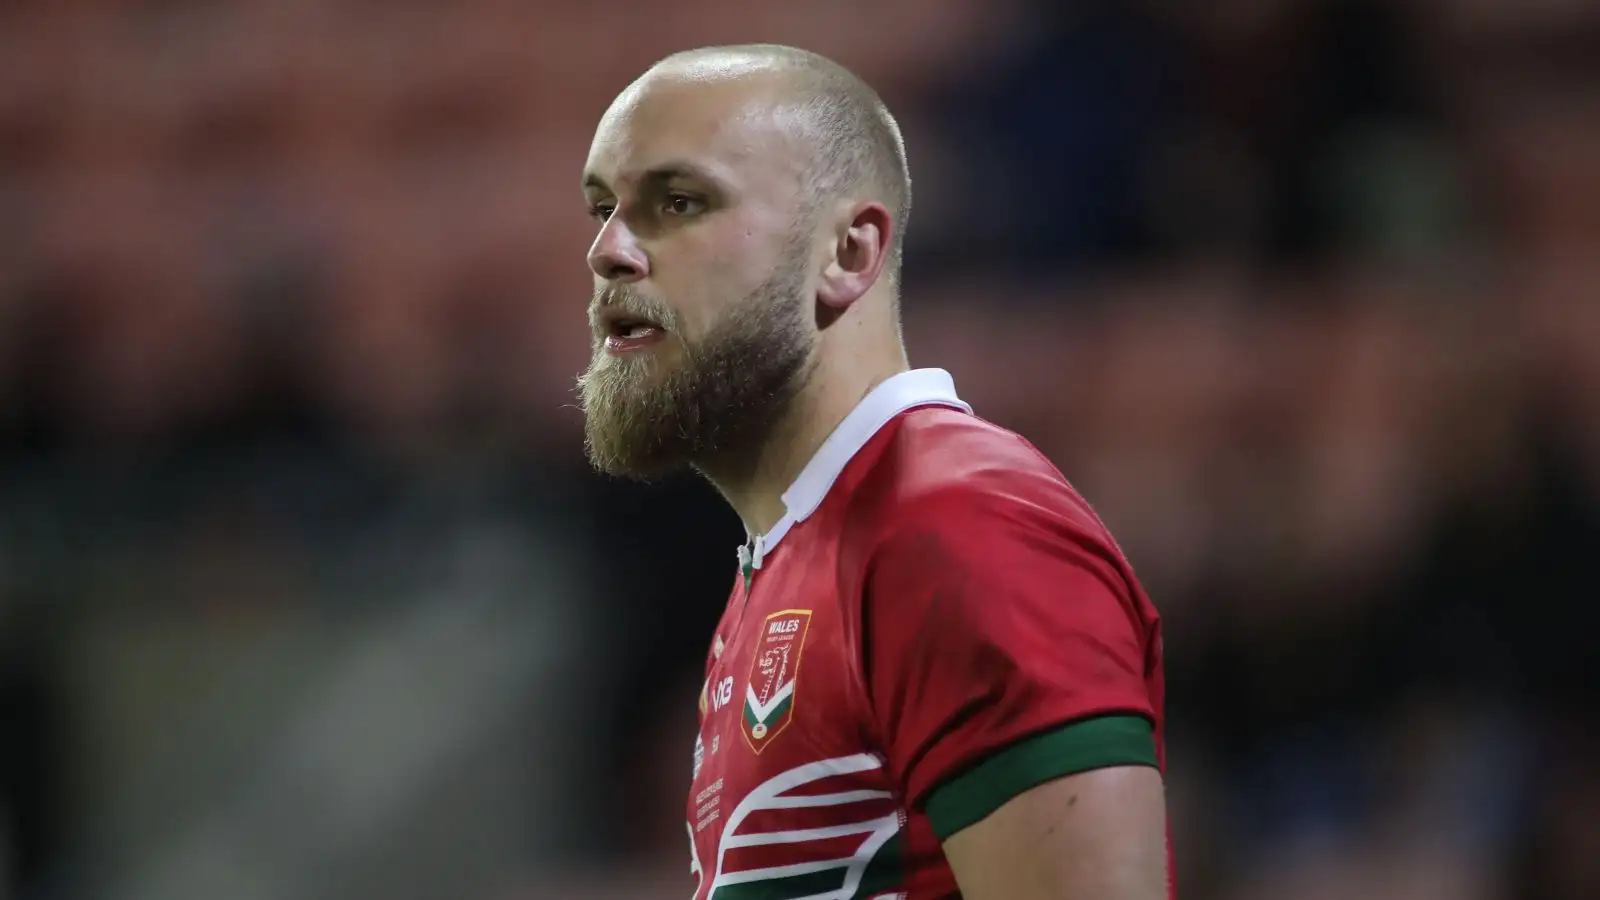 Wales World Cup star makes Championship return after hiatus to get ‘love and desire for the game back’